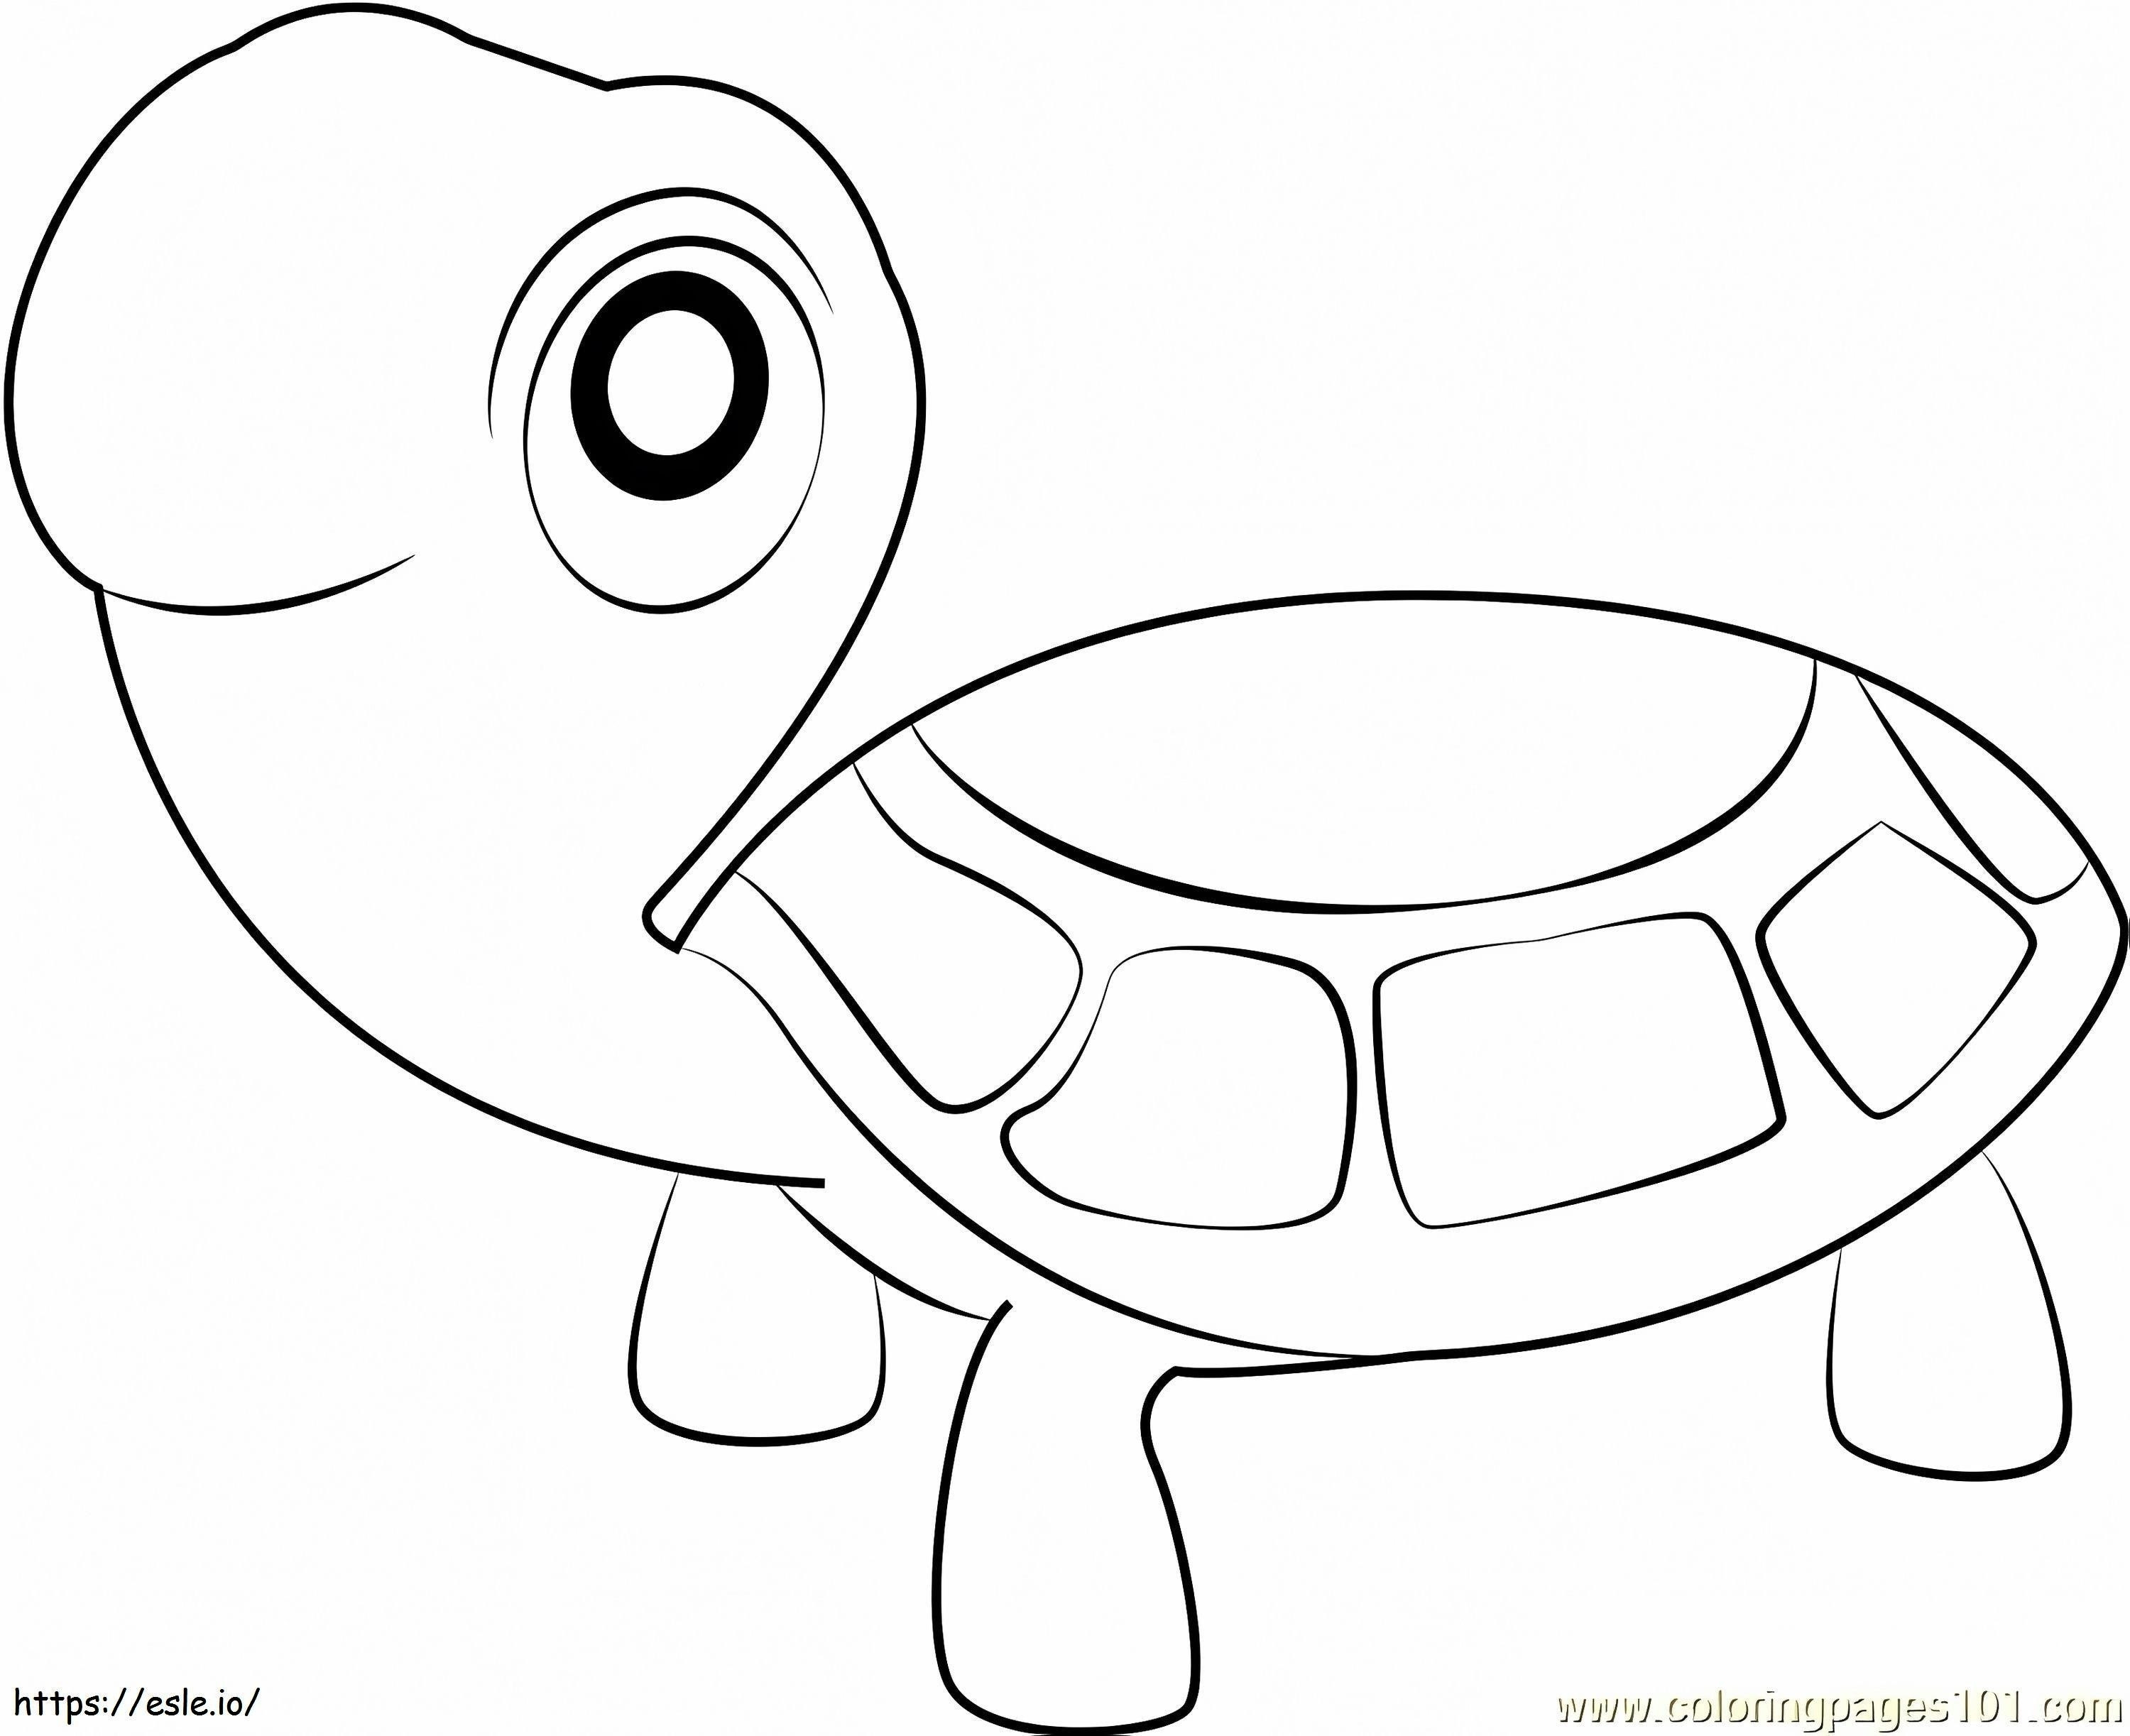 1530323180_The Turtles coloring page